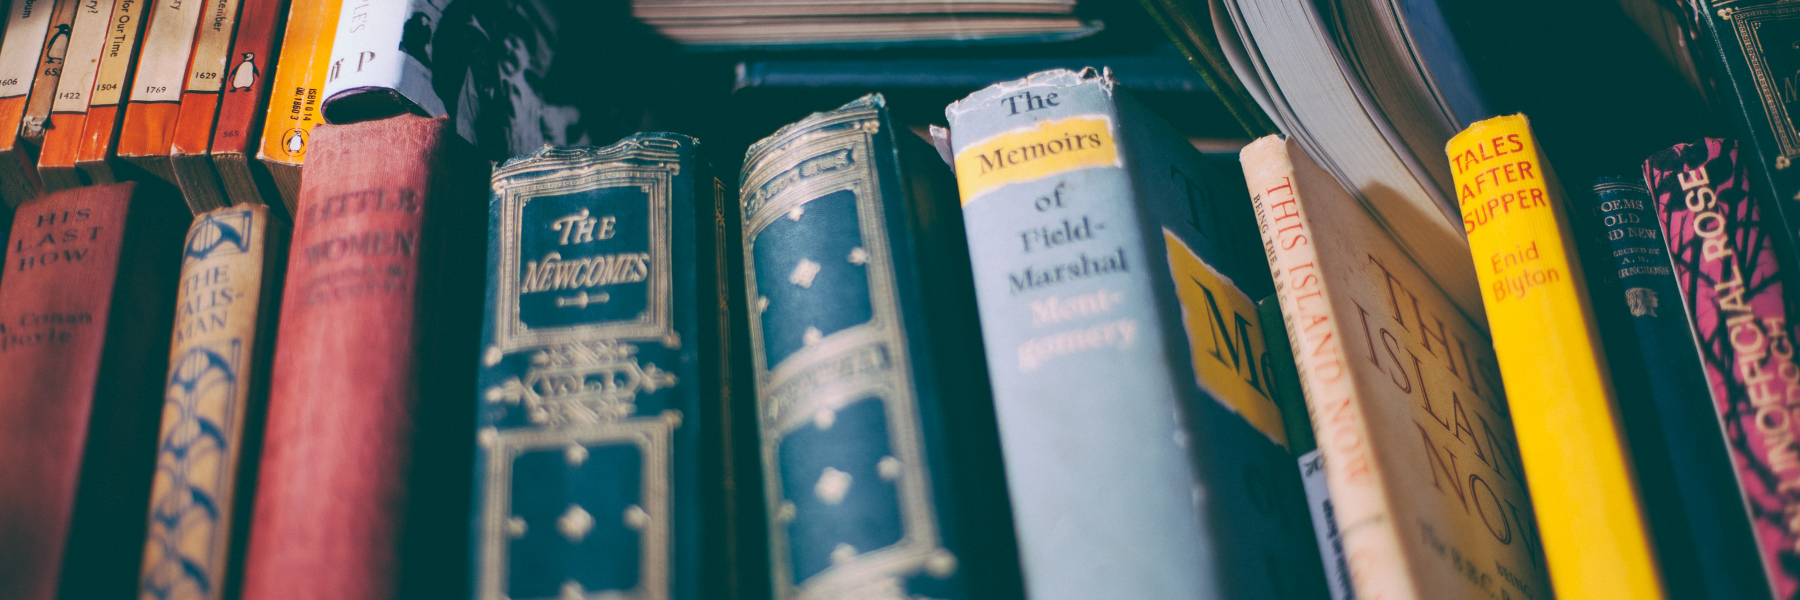 The Beginner's Guide to Collecting Vintage Books-reading vintage an online quality vintage bookstore